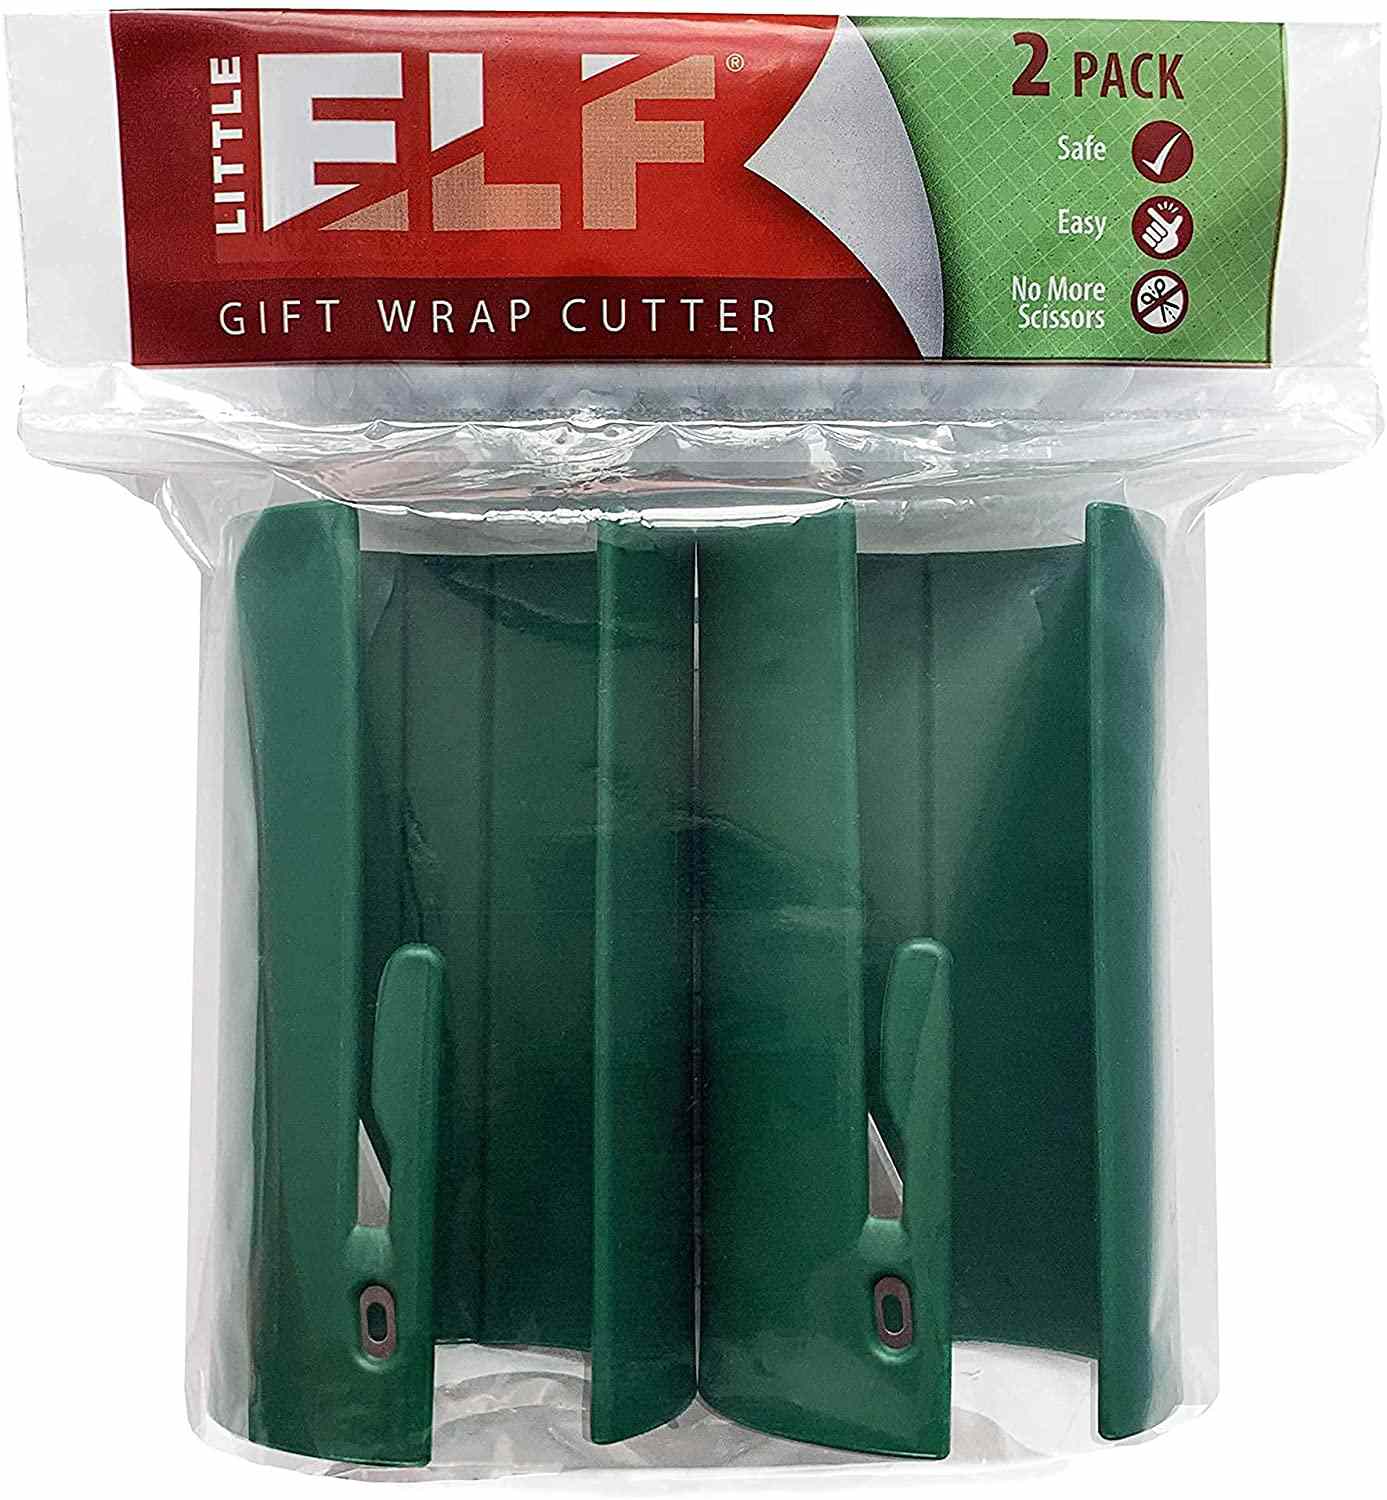 green gift wrap cutters in cellophane bag